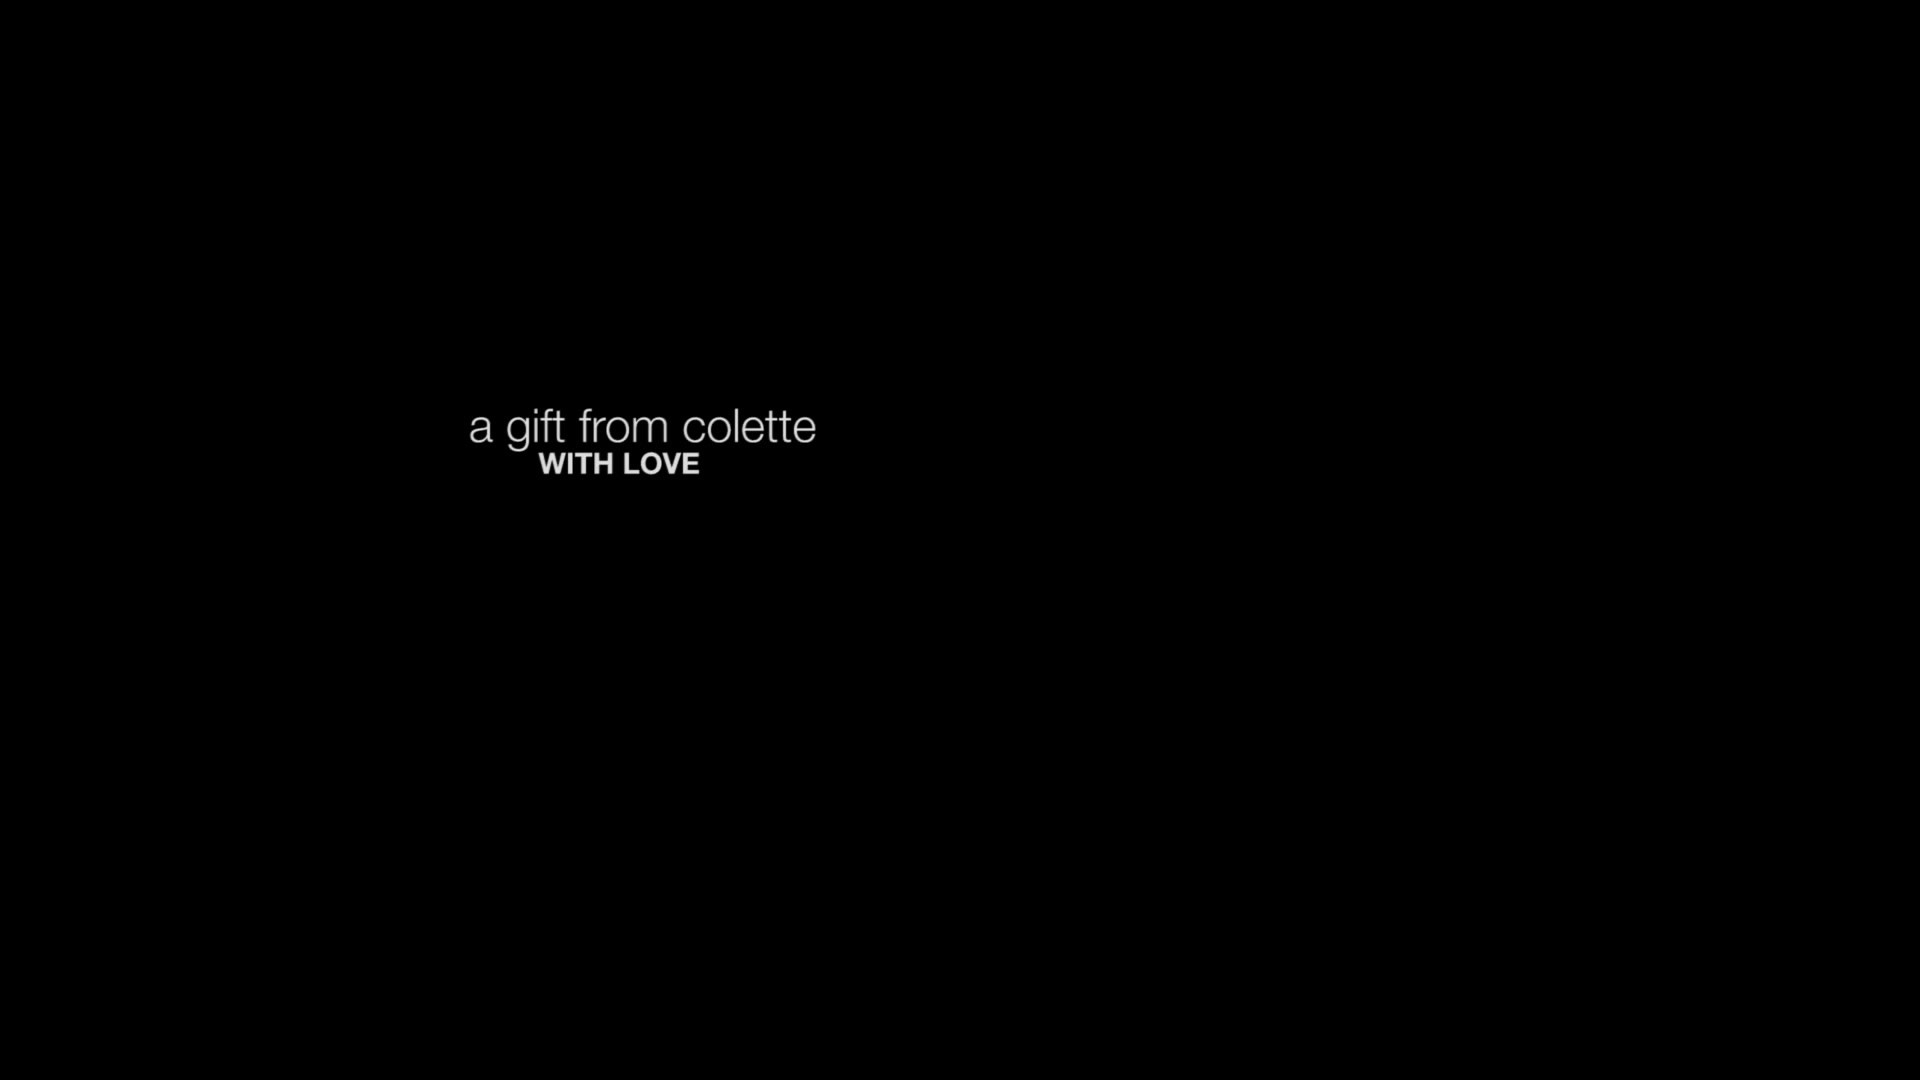 XPORN - A Gift From Collette (Scarlet)